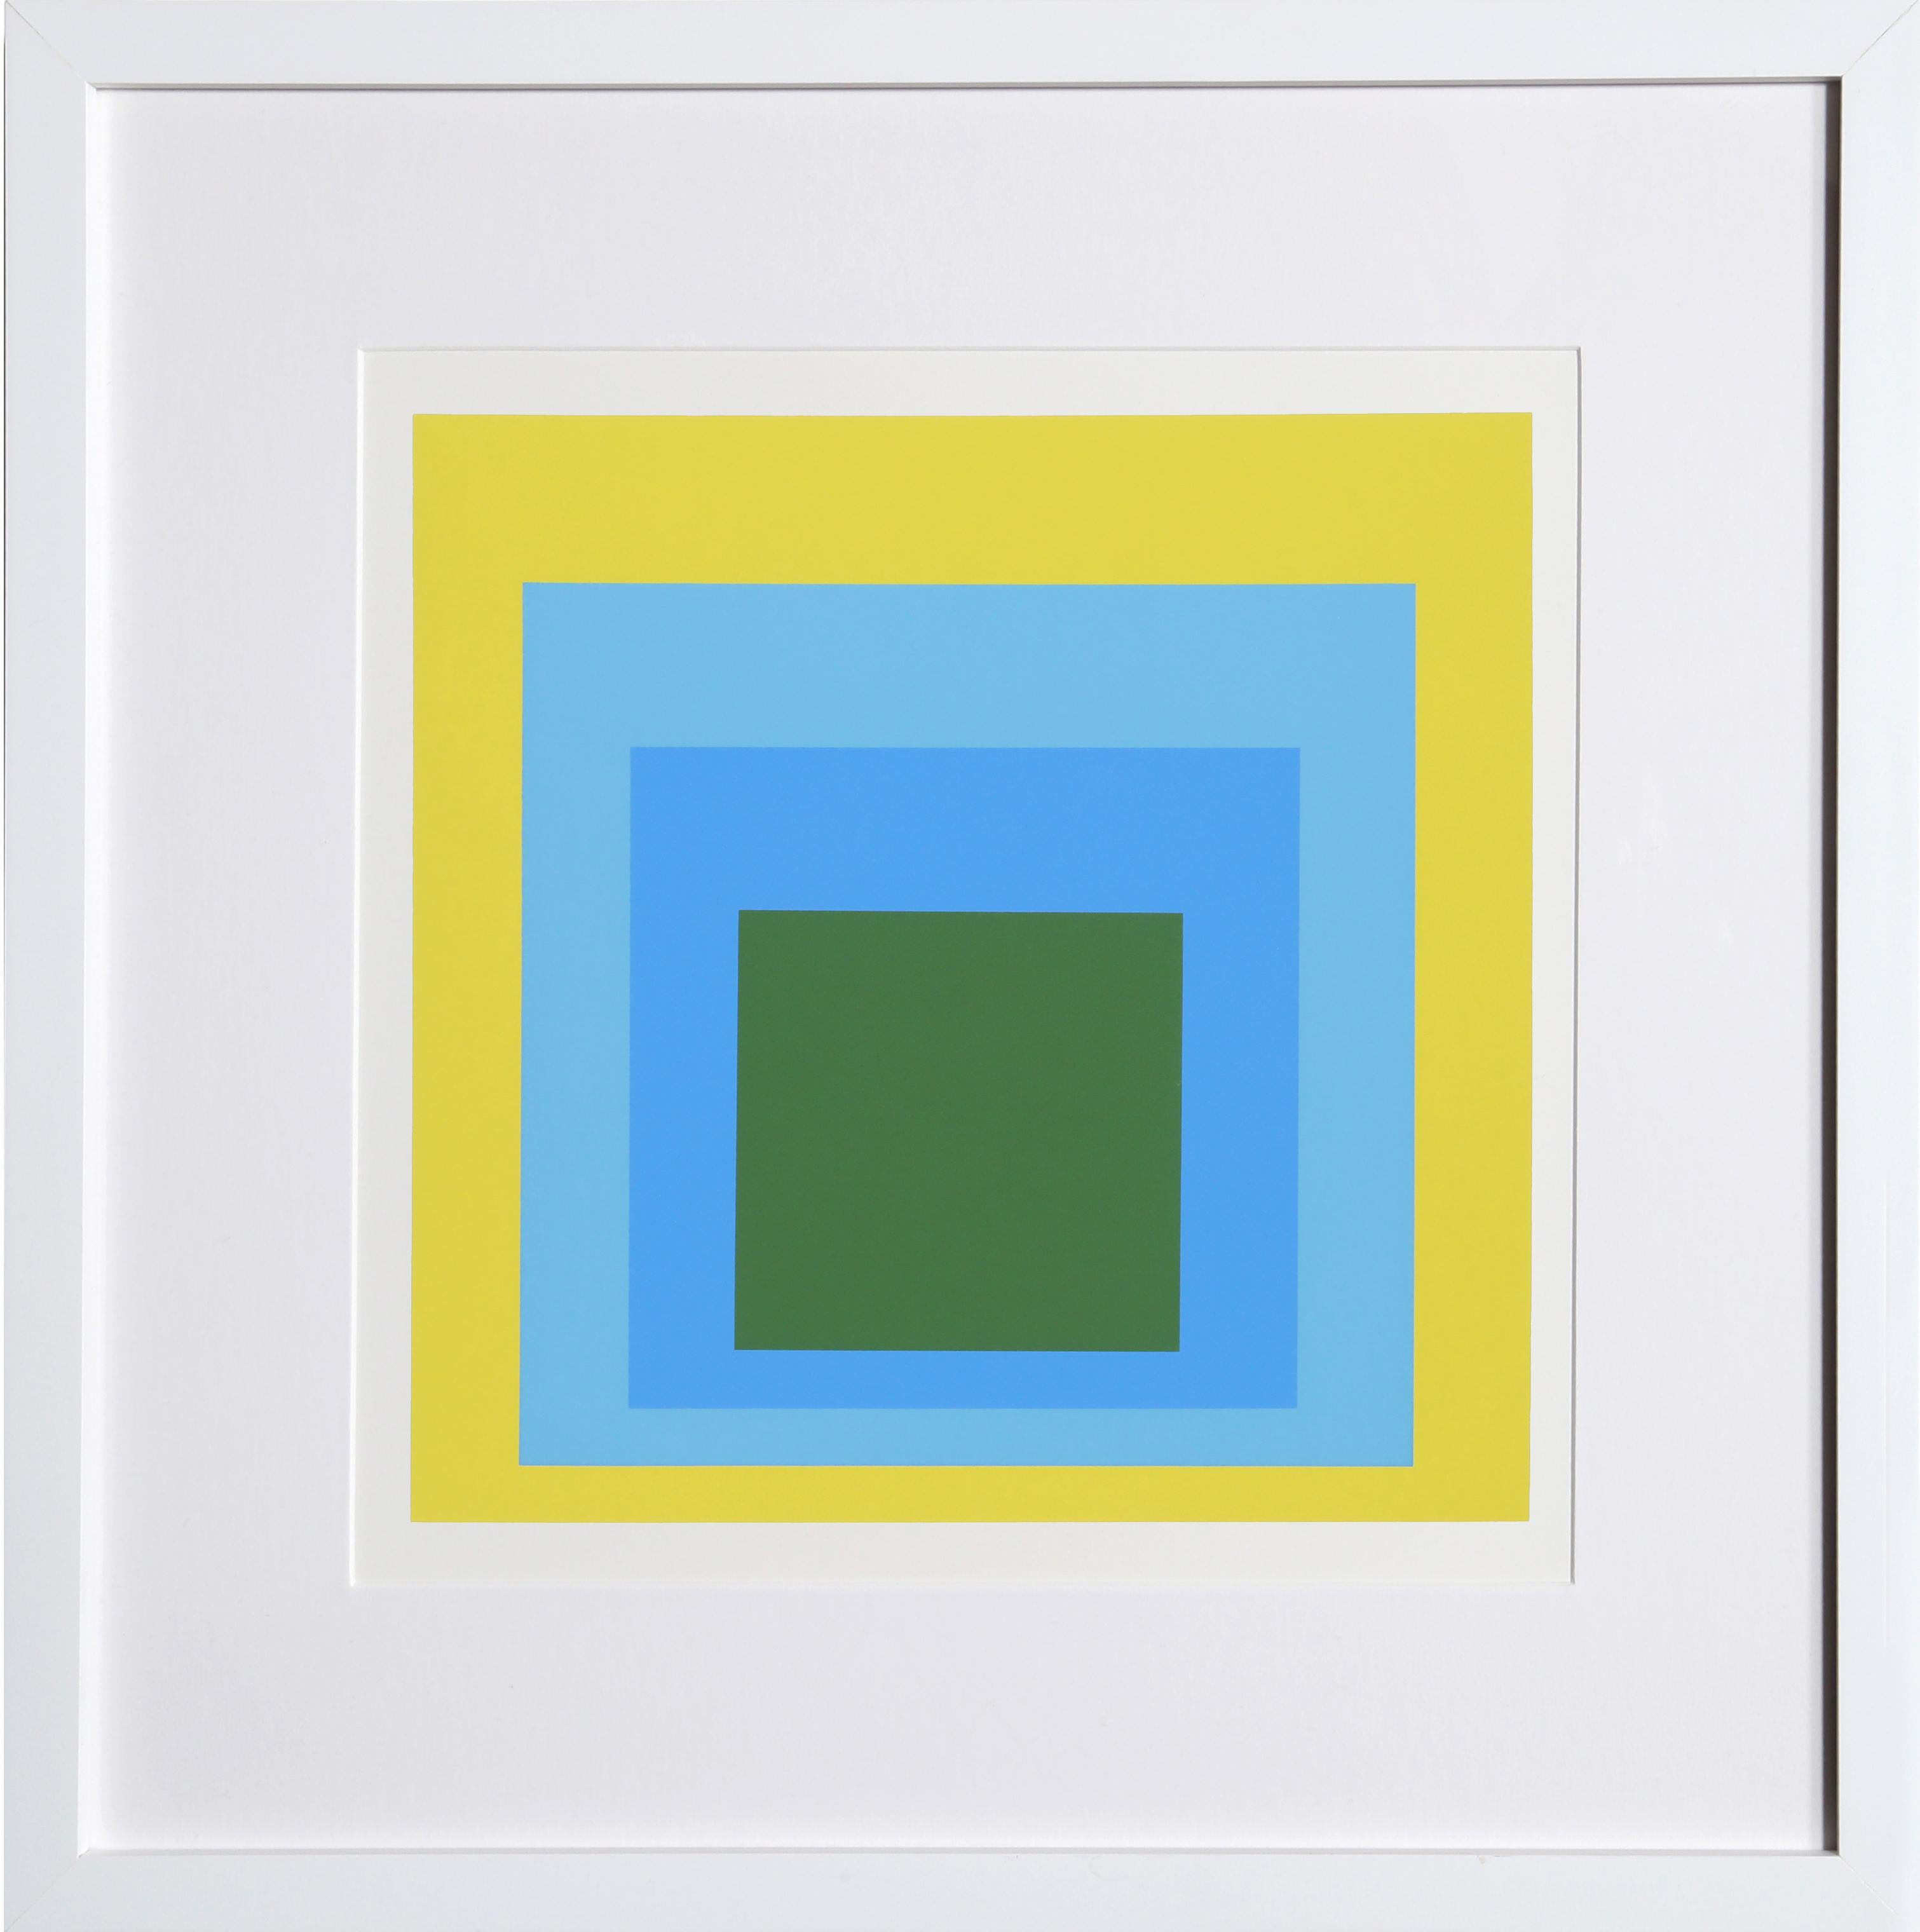 Josef Albers Abstract Print - Homage to the Square - P1, F5, I1